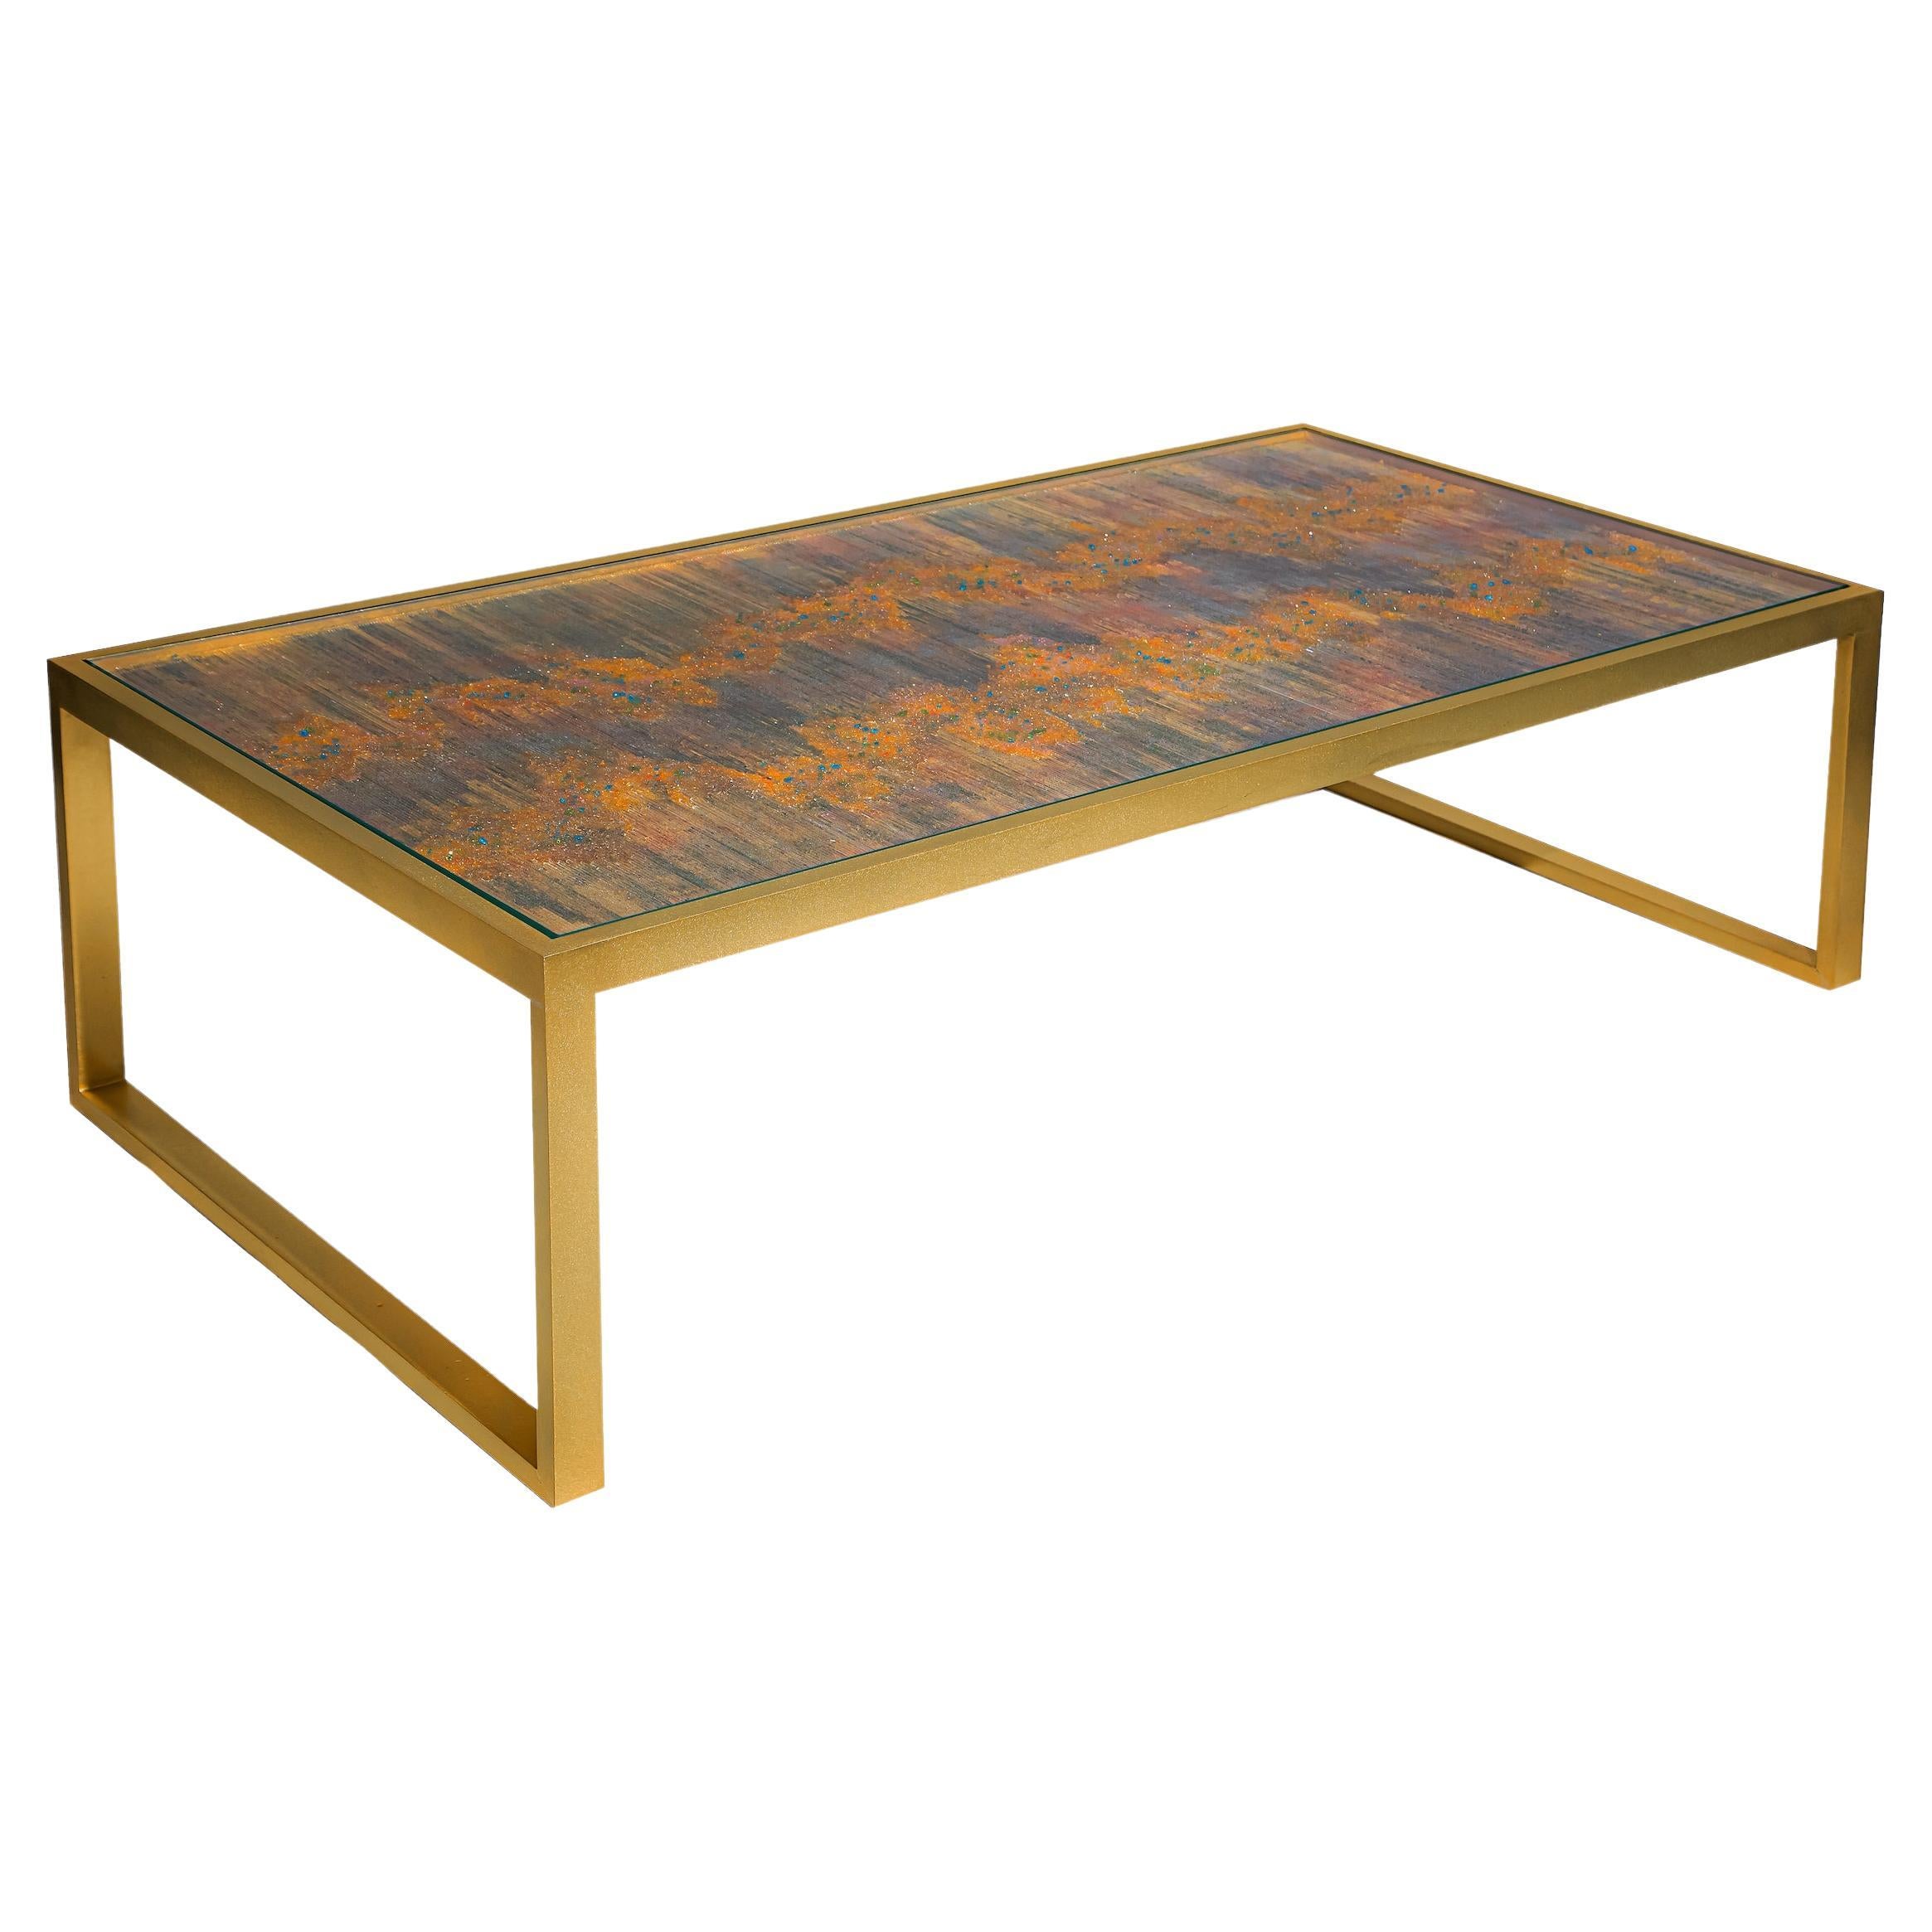 "Aurora" One-Of-A-Kind Glass Topped Coffee Table Satin Finish Brass Base For Sale